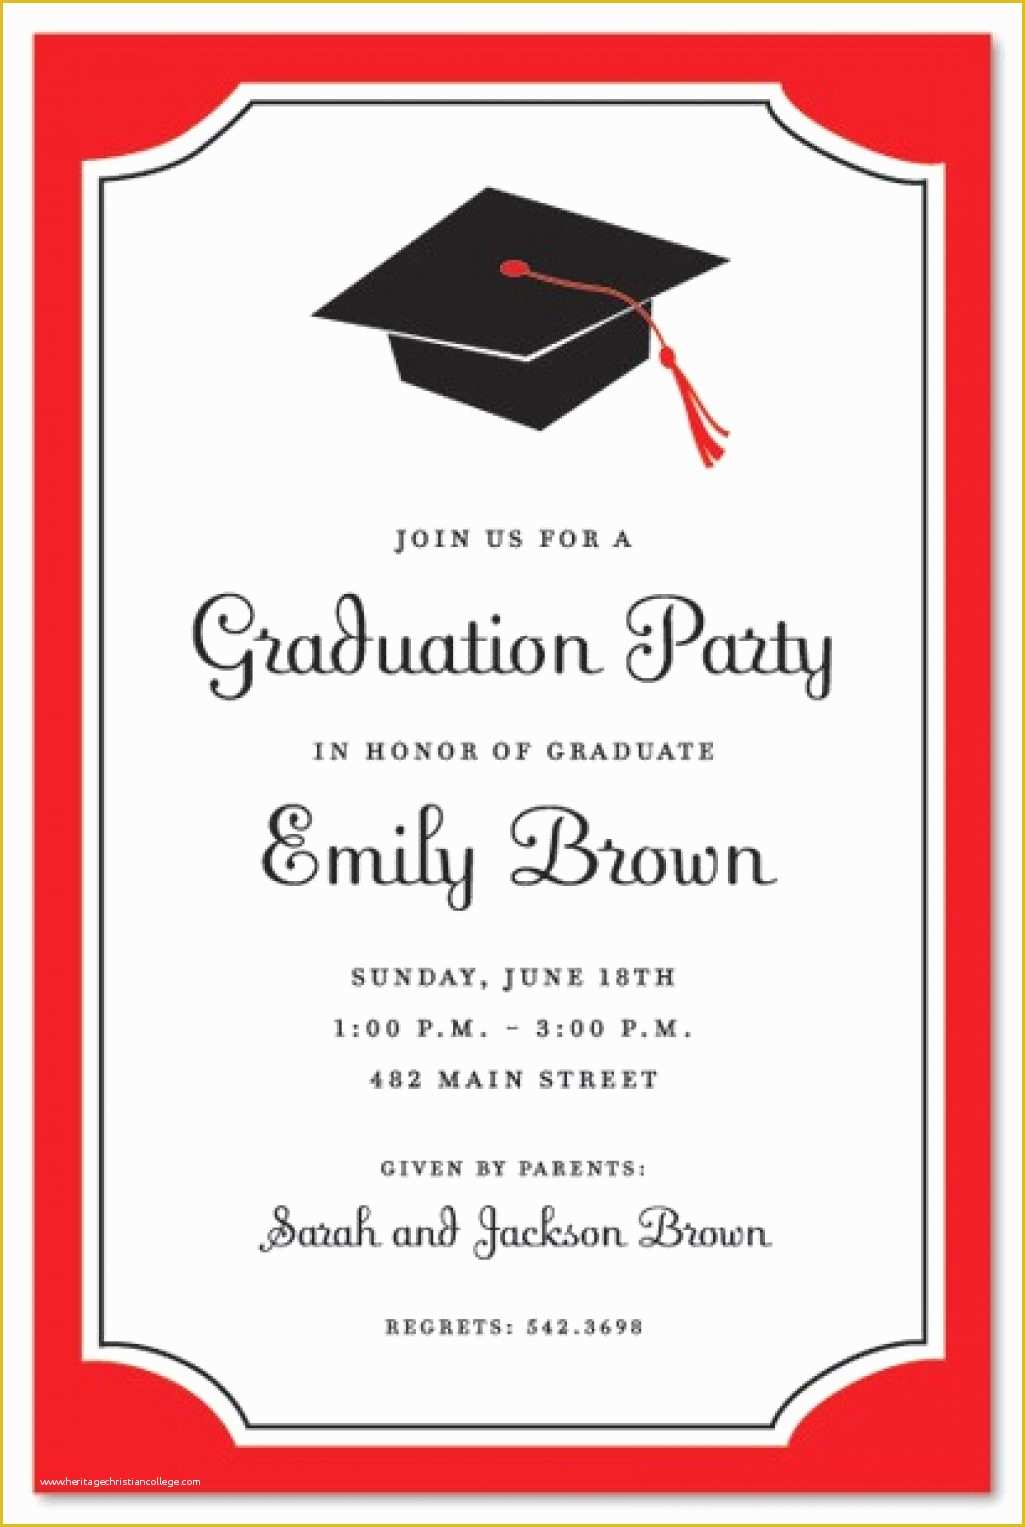 Graduation Dinner Invitation Template Free Of Friday February 22nd 2019’s Archives Sample Letter